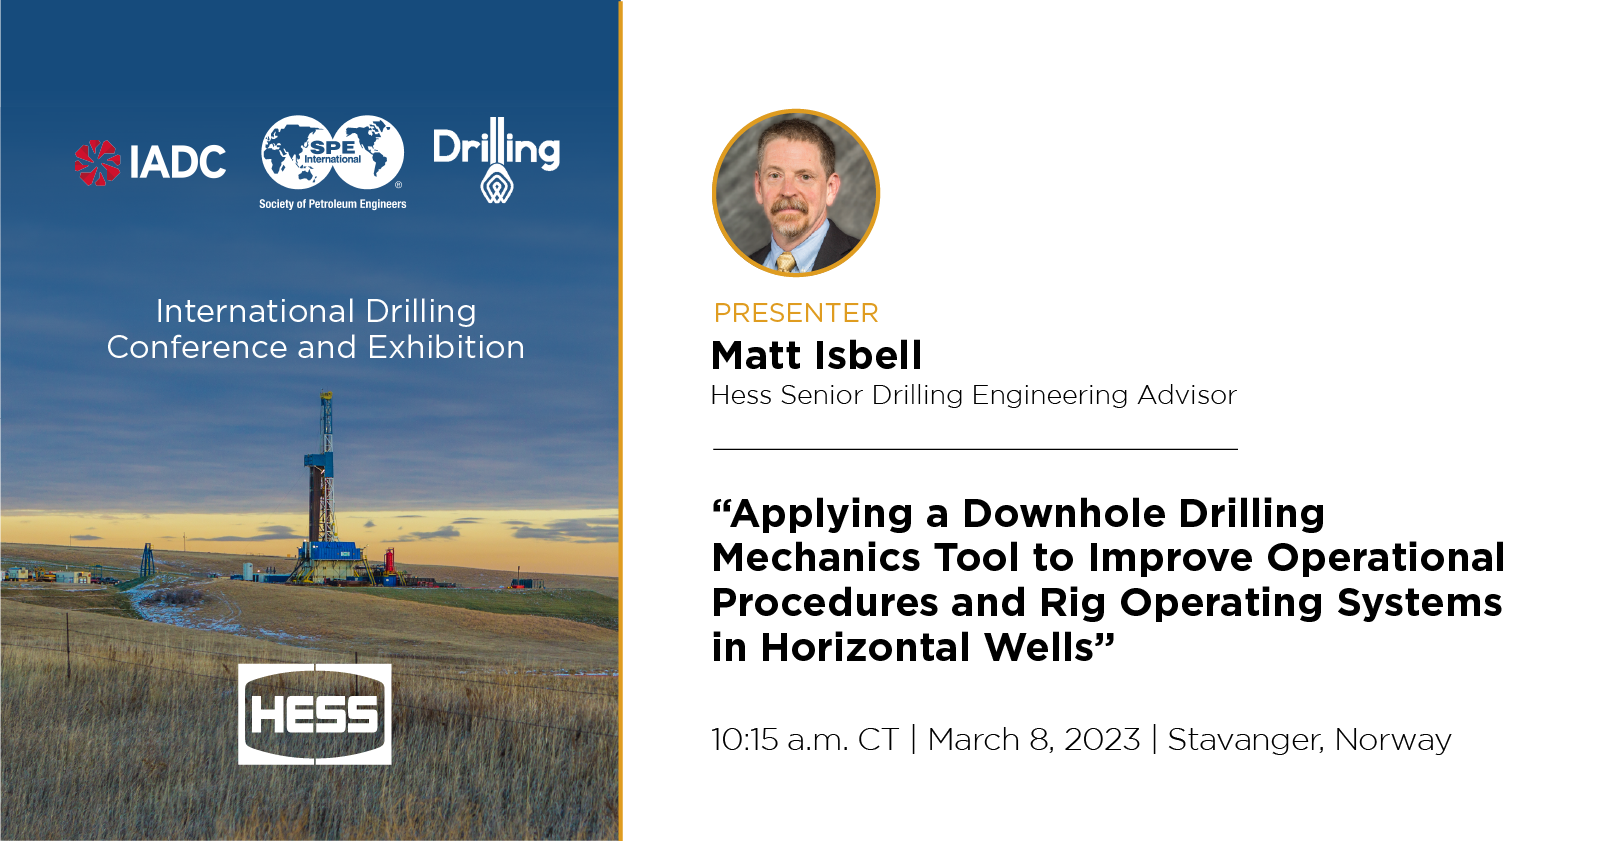 Matt Isbell Presenter at International Drilling Conference and Exhibition